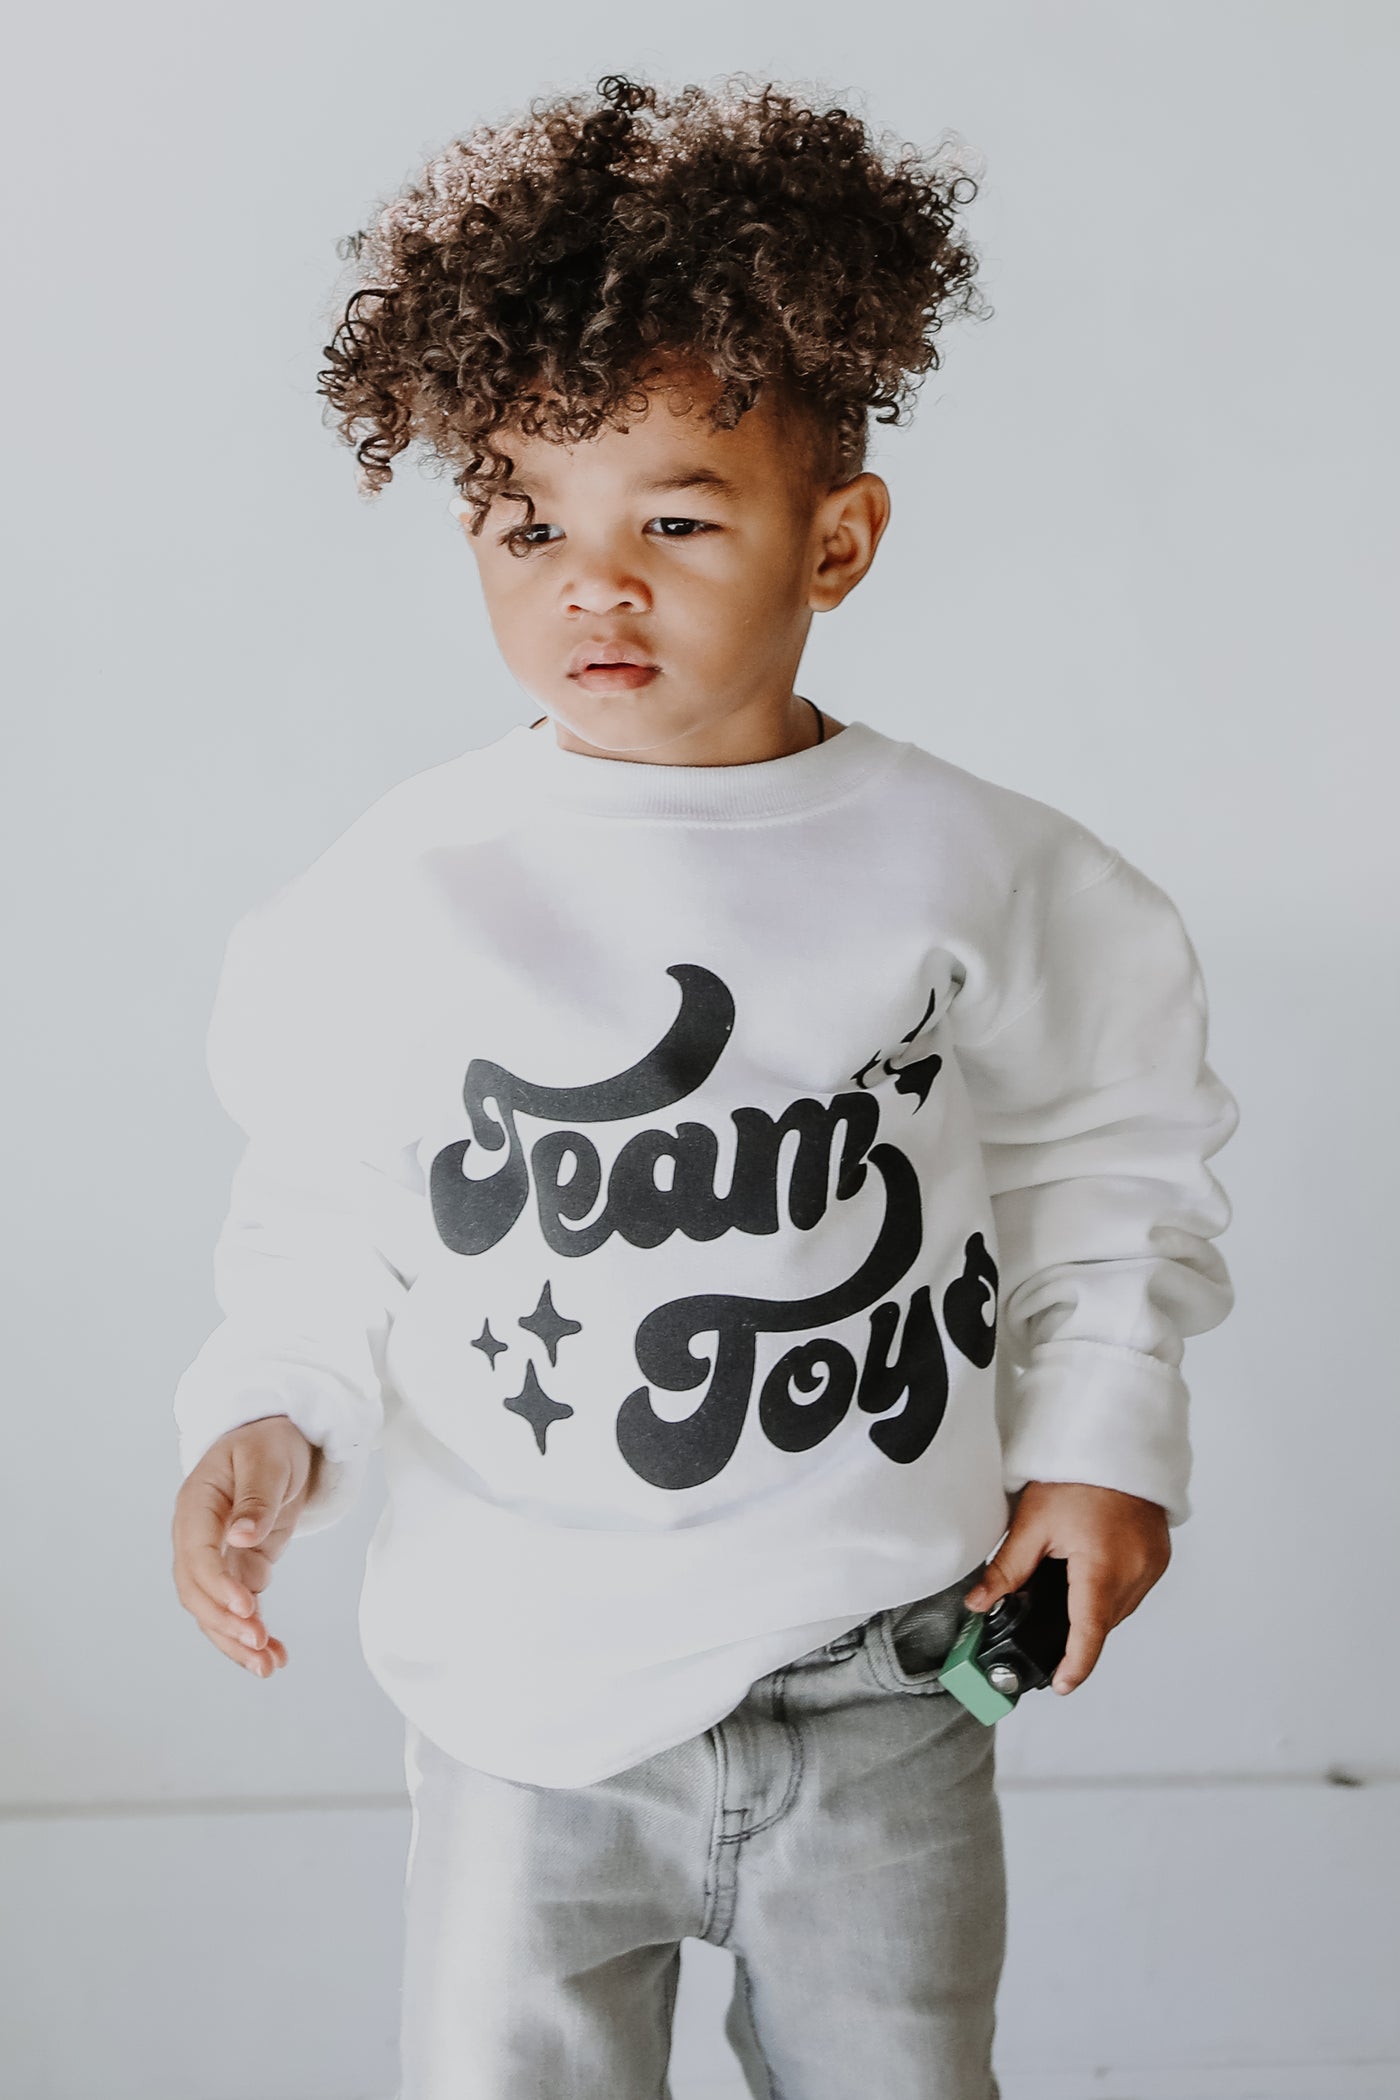 Youth Team Toys Pullover from dress up